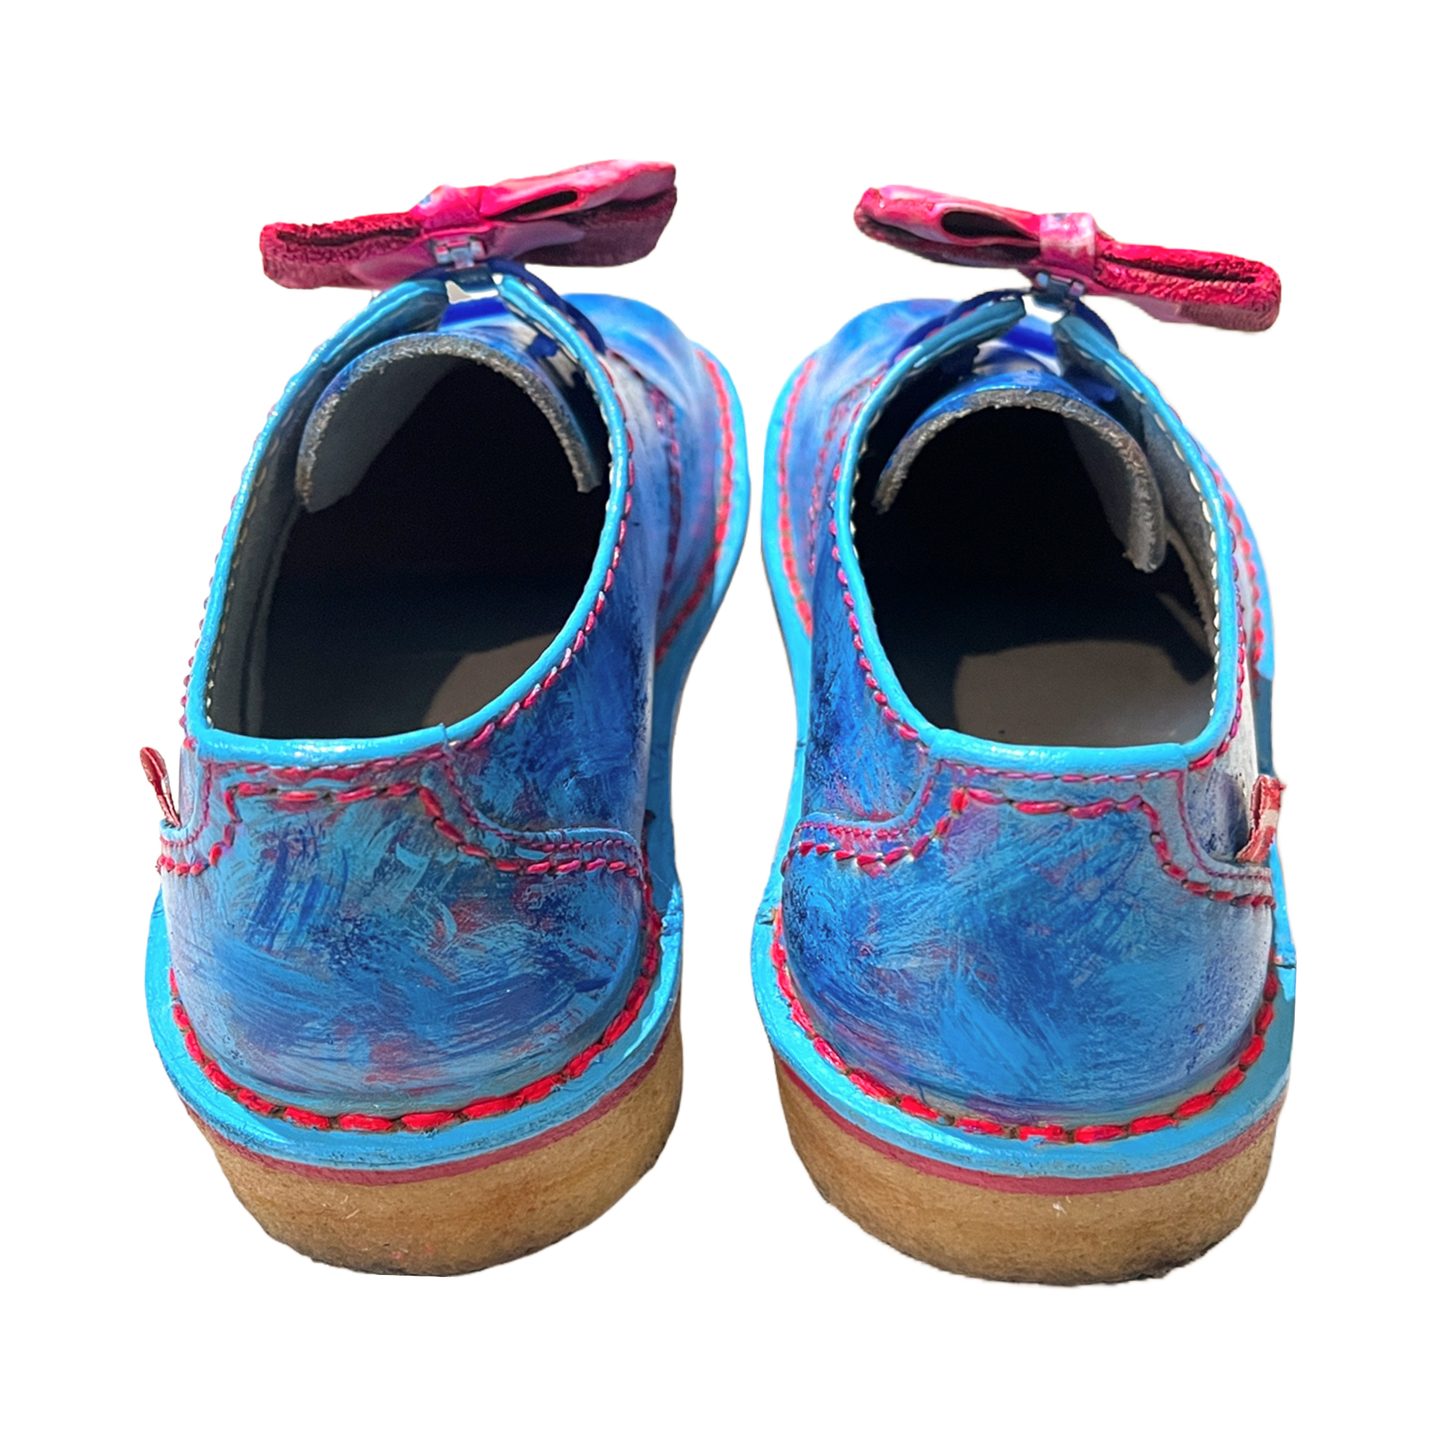 "Cold Hearted" - Up-cycled Duckfeet USA Shoes - Size 37 (US 7) - Hand Painted by Skye De La Rosa